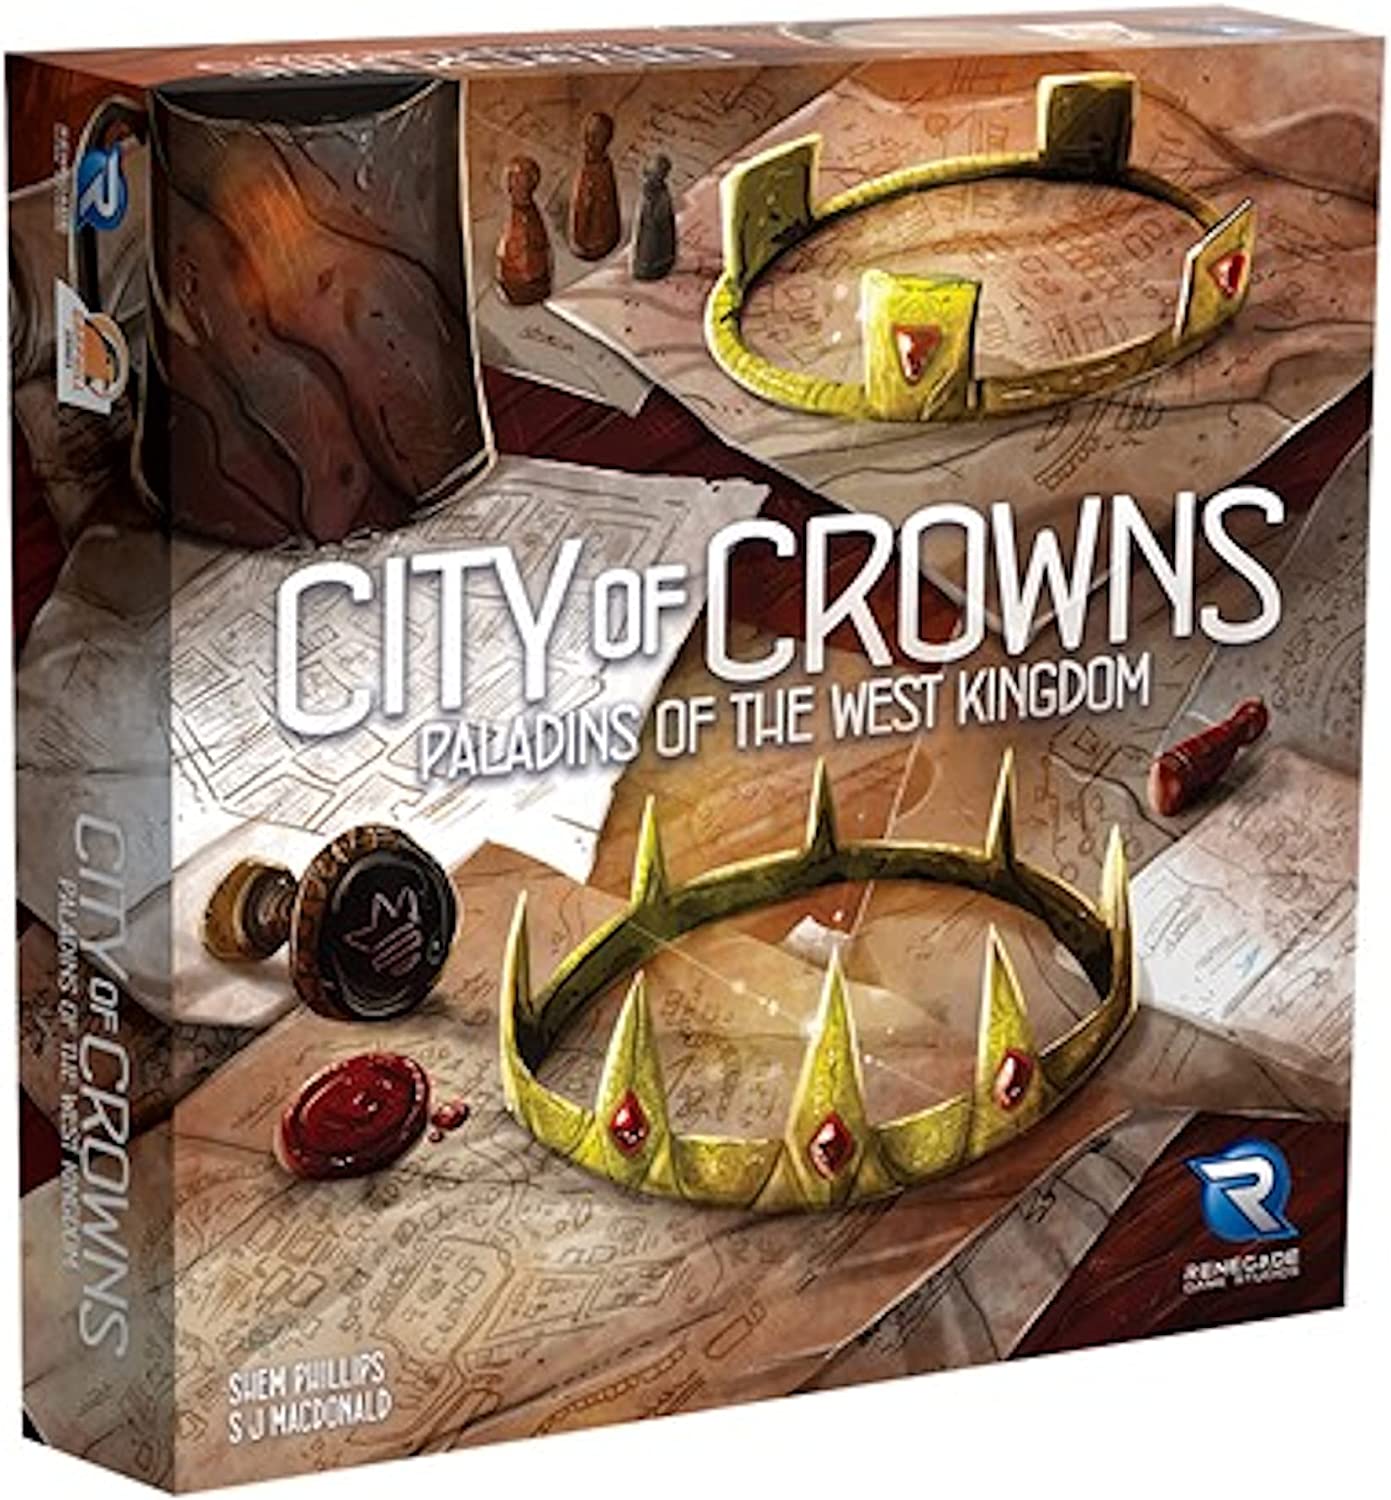 Paladins of The West Kingdom: City of Crowns Board Game